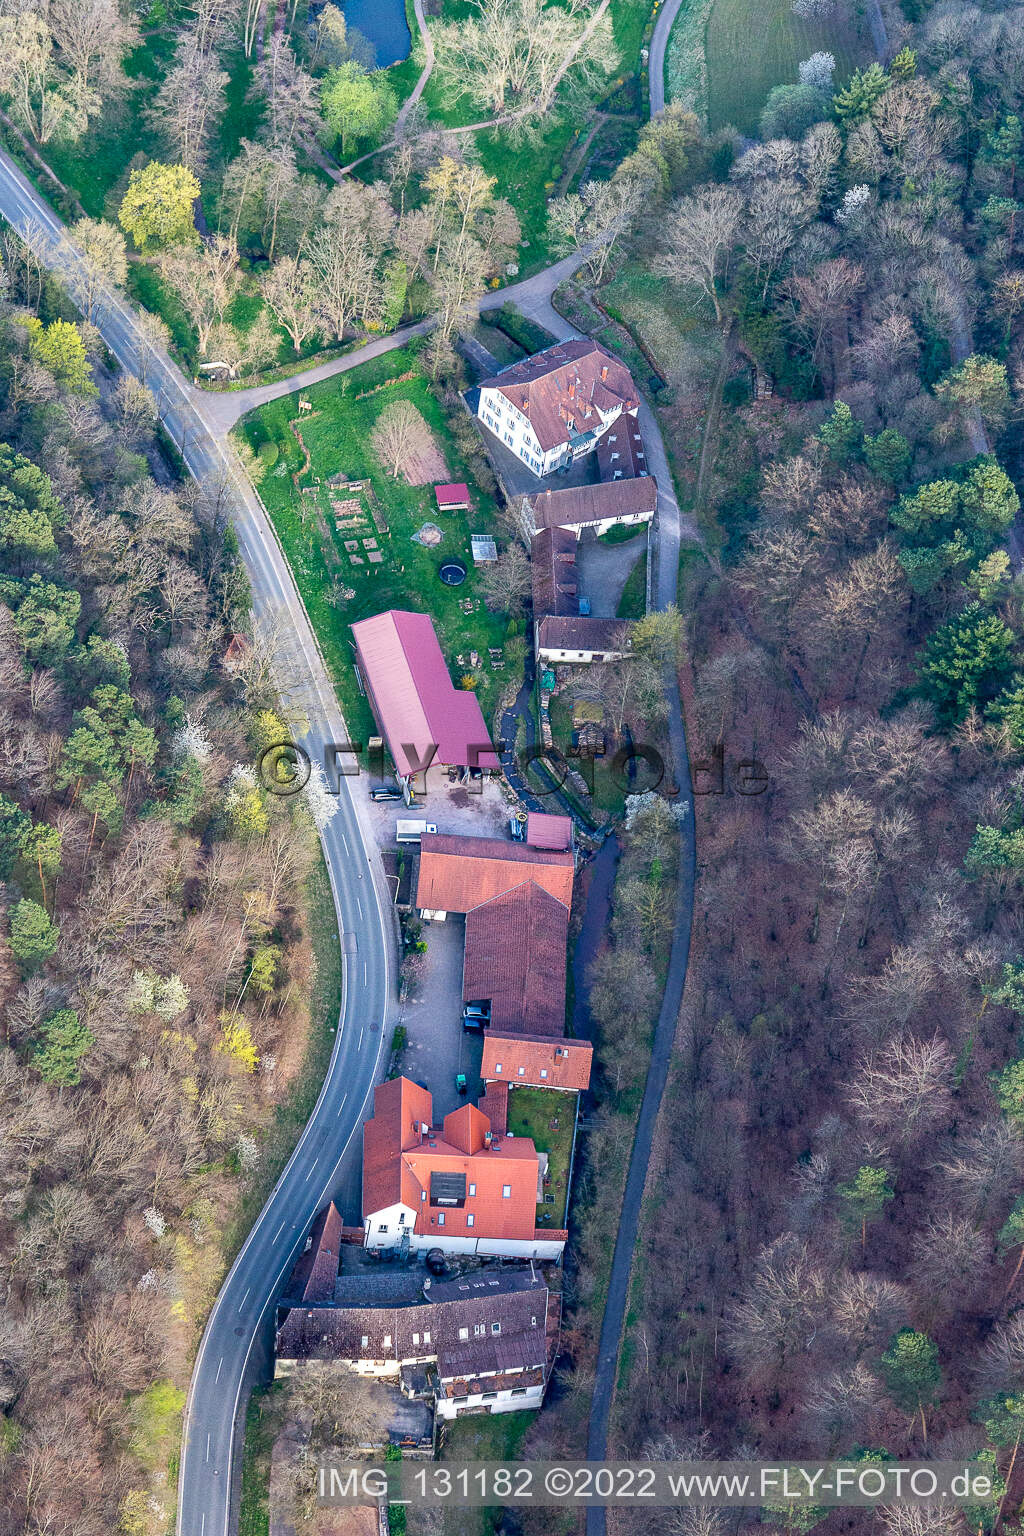 Aerial view of Porzelt winery in Klingenmünster in the state Rhineland-Palatinate, Germany